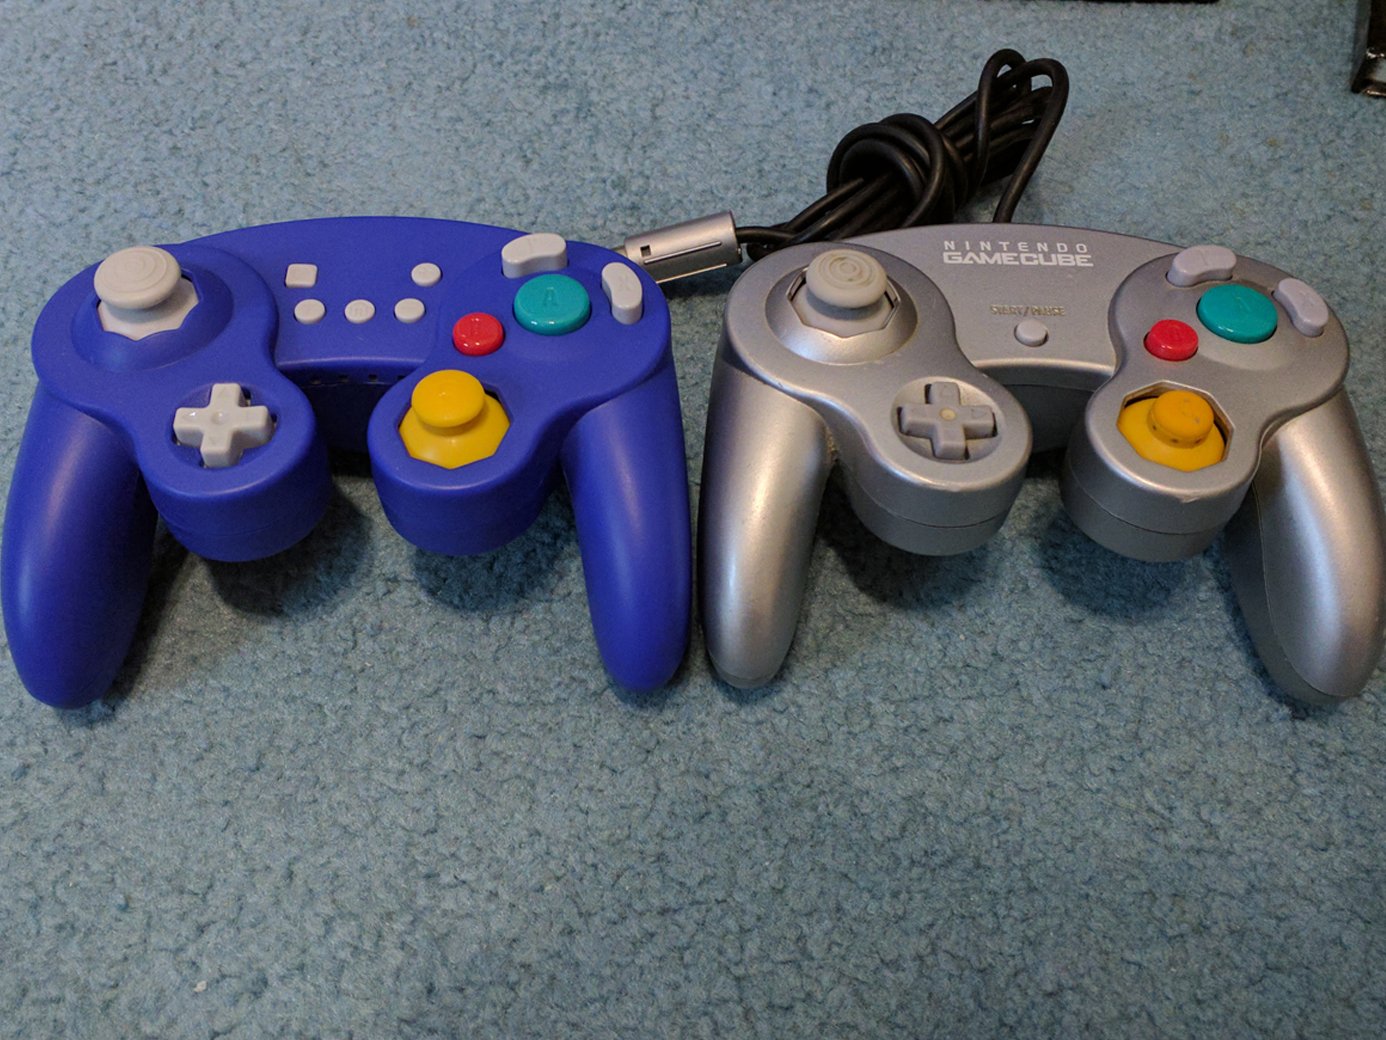 Official GBAtemp Review: EXLENE Wireless Gamecube Controller for Switch/PC  (Hardware) | GBAtemp.net - The Independent Video Game Community